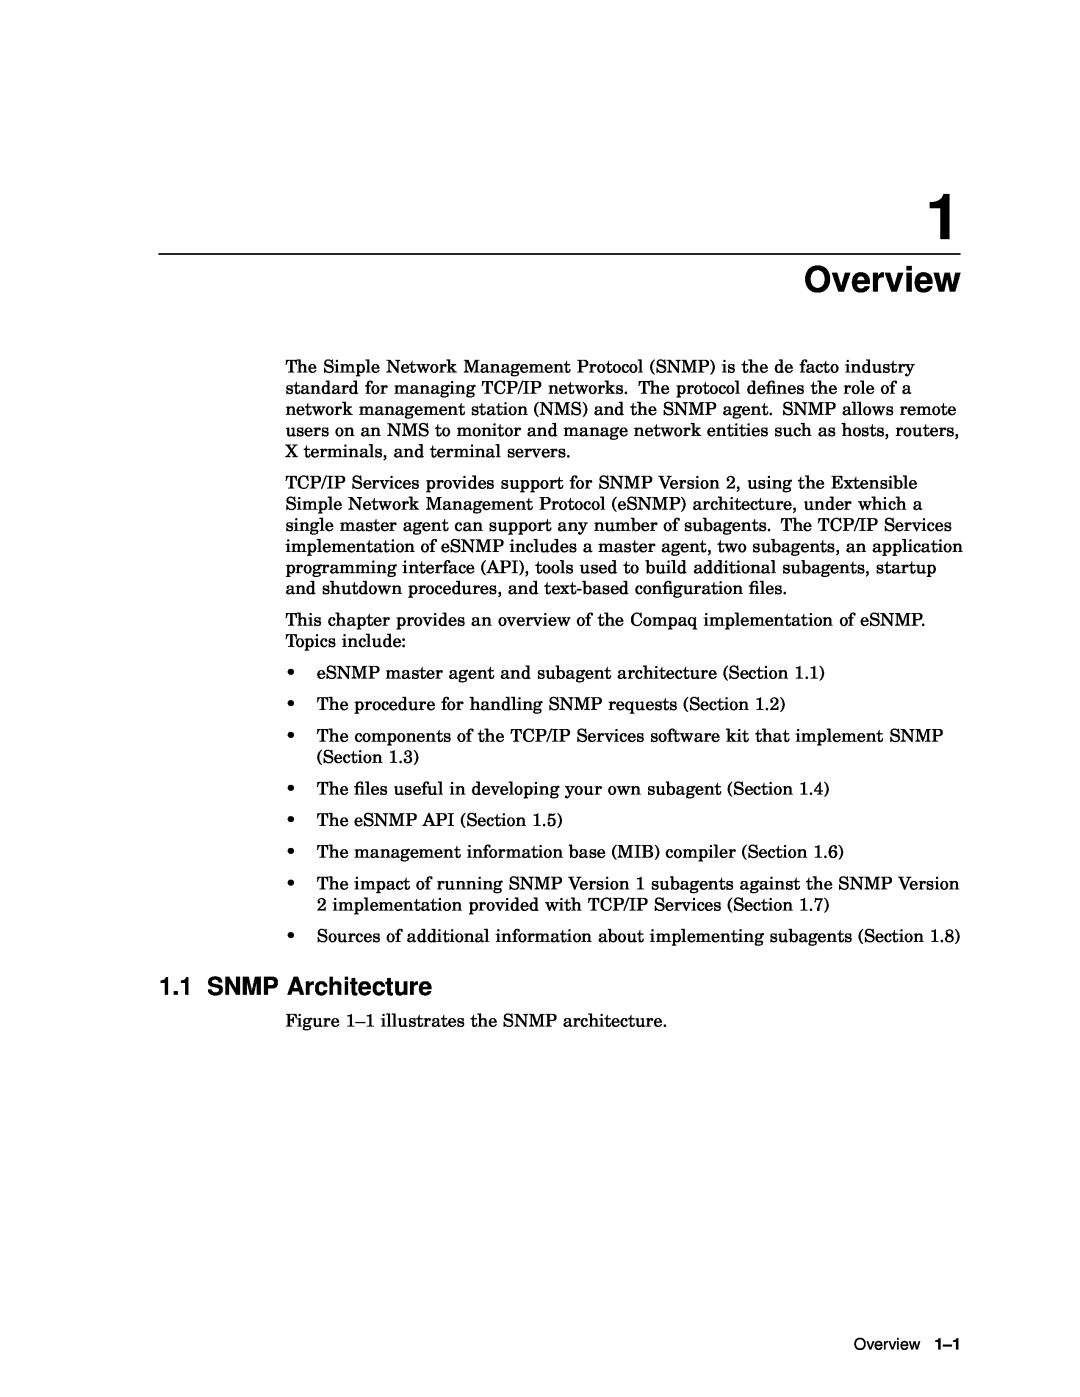 Compaq AAR04BCTE manual Overview, SNMP Architecture 